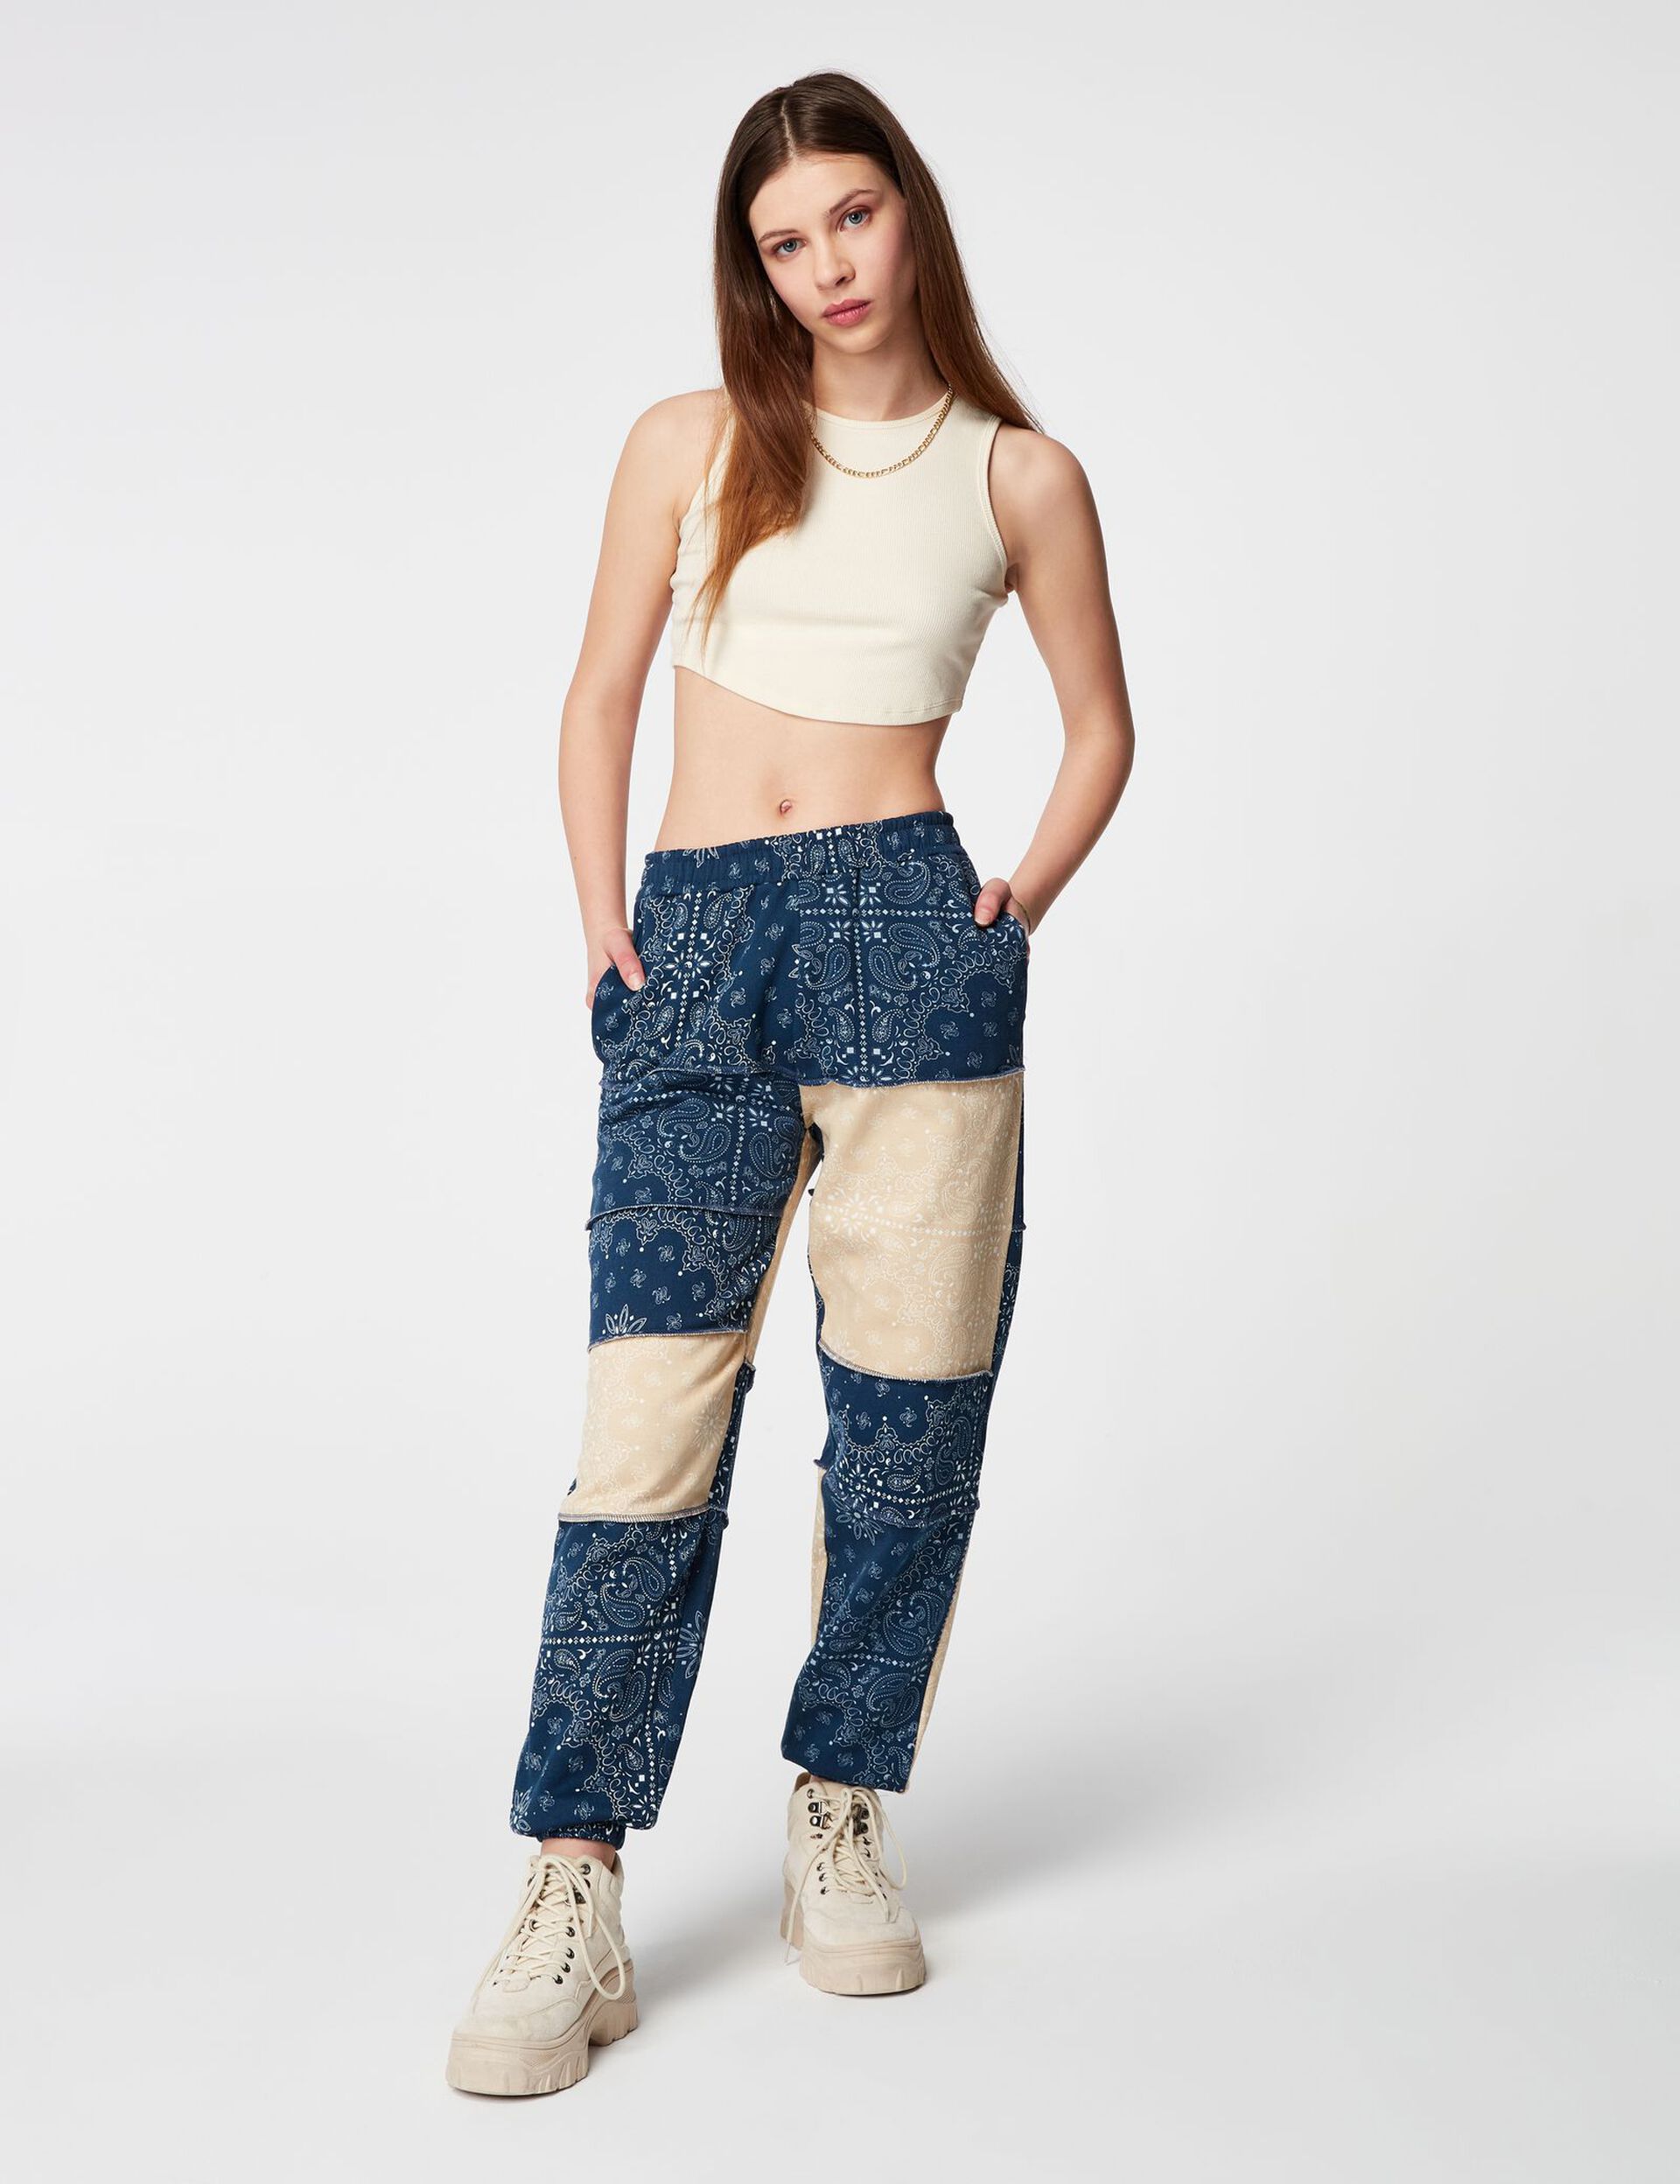 Patchwork-style joggers